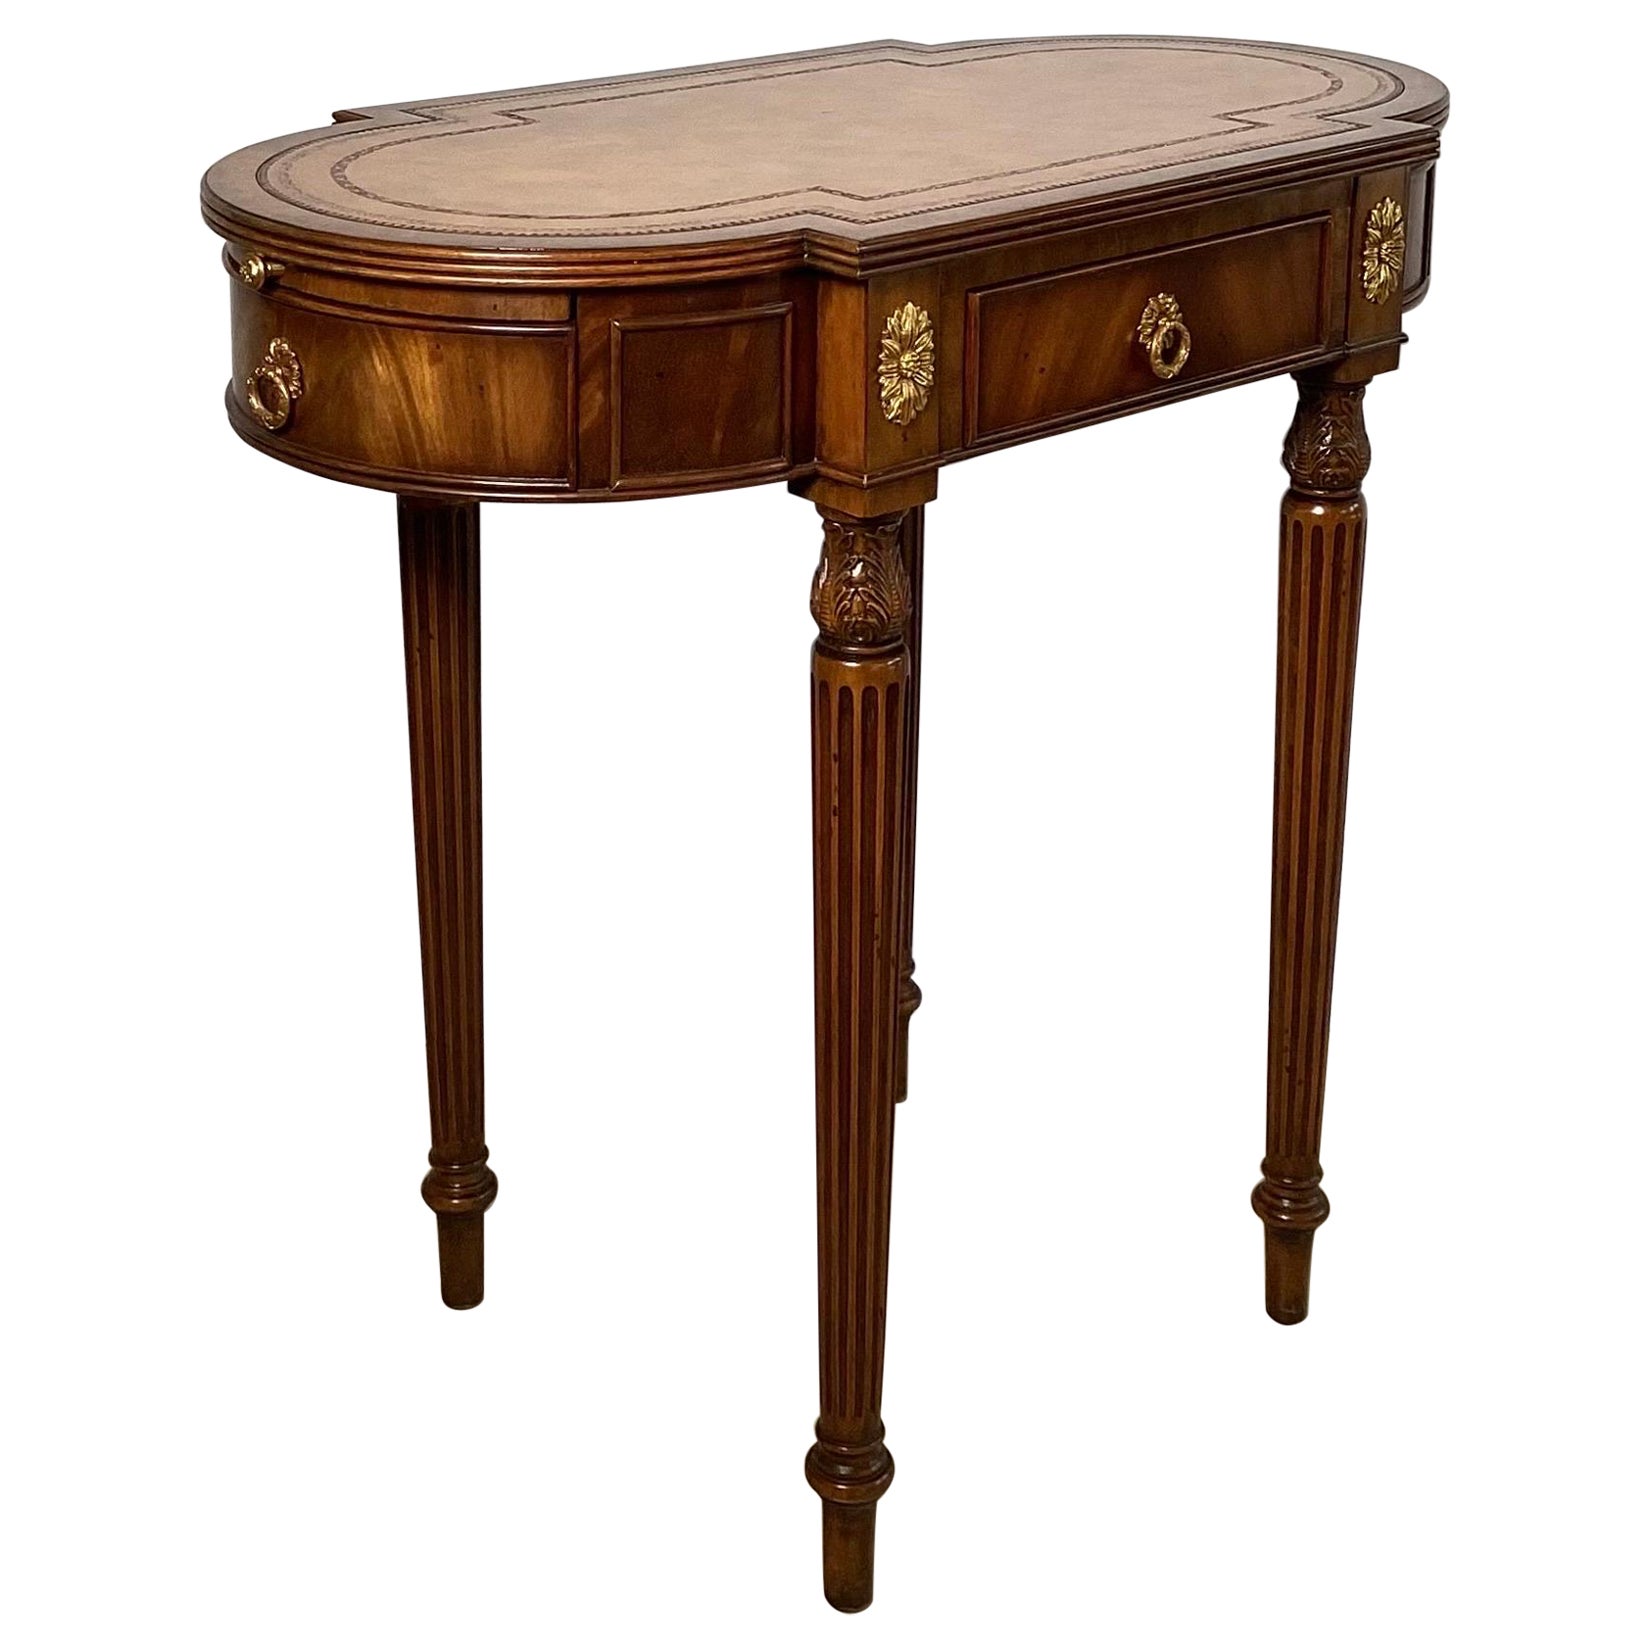 Oval Walnut and Mahogany Accent Work Table with Leather Top by Maitland Smith